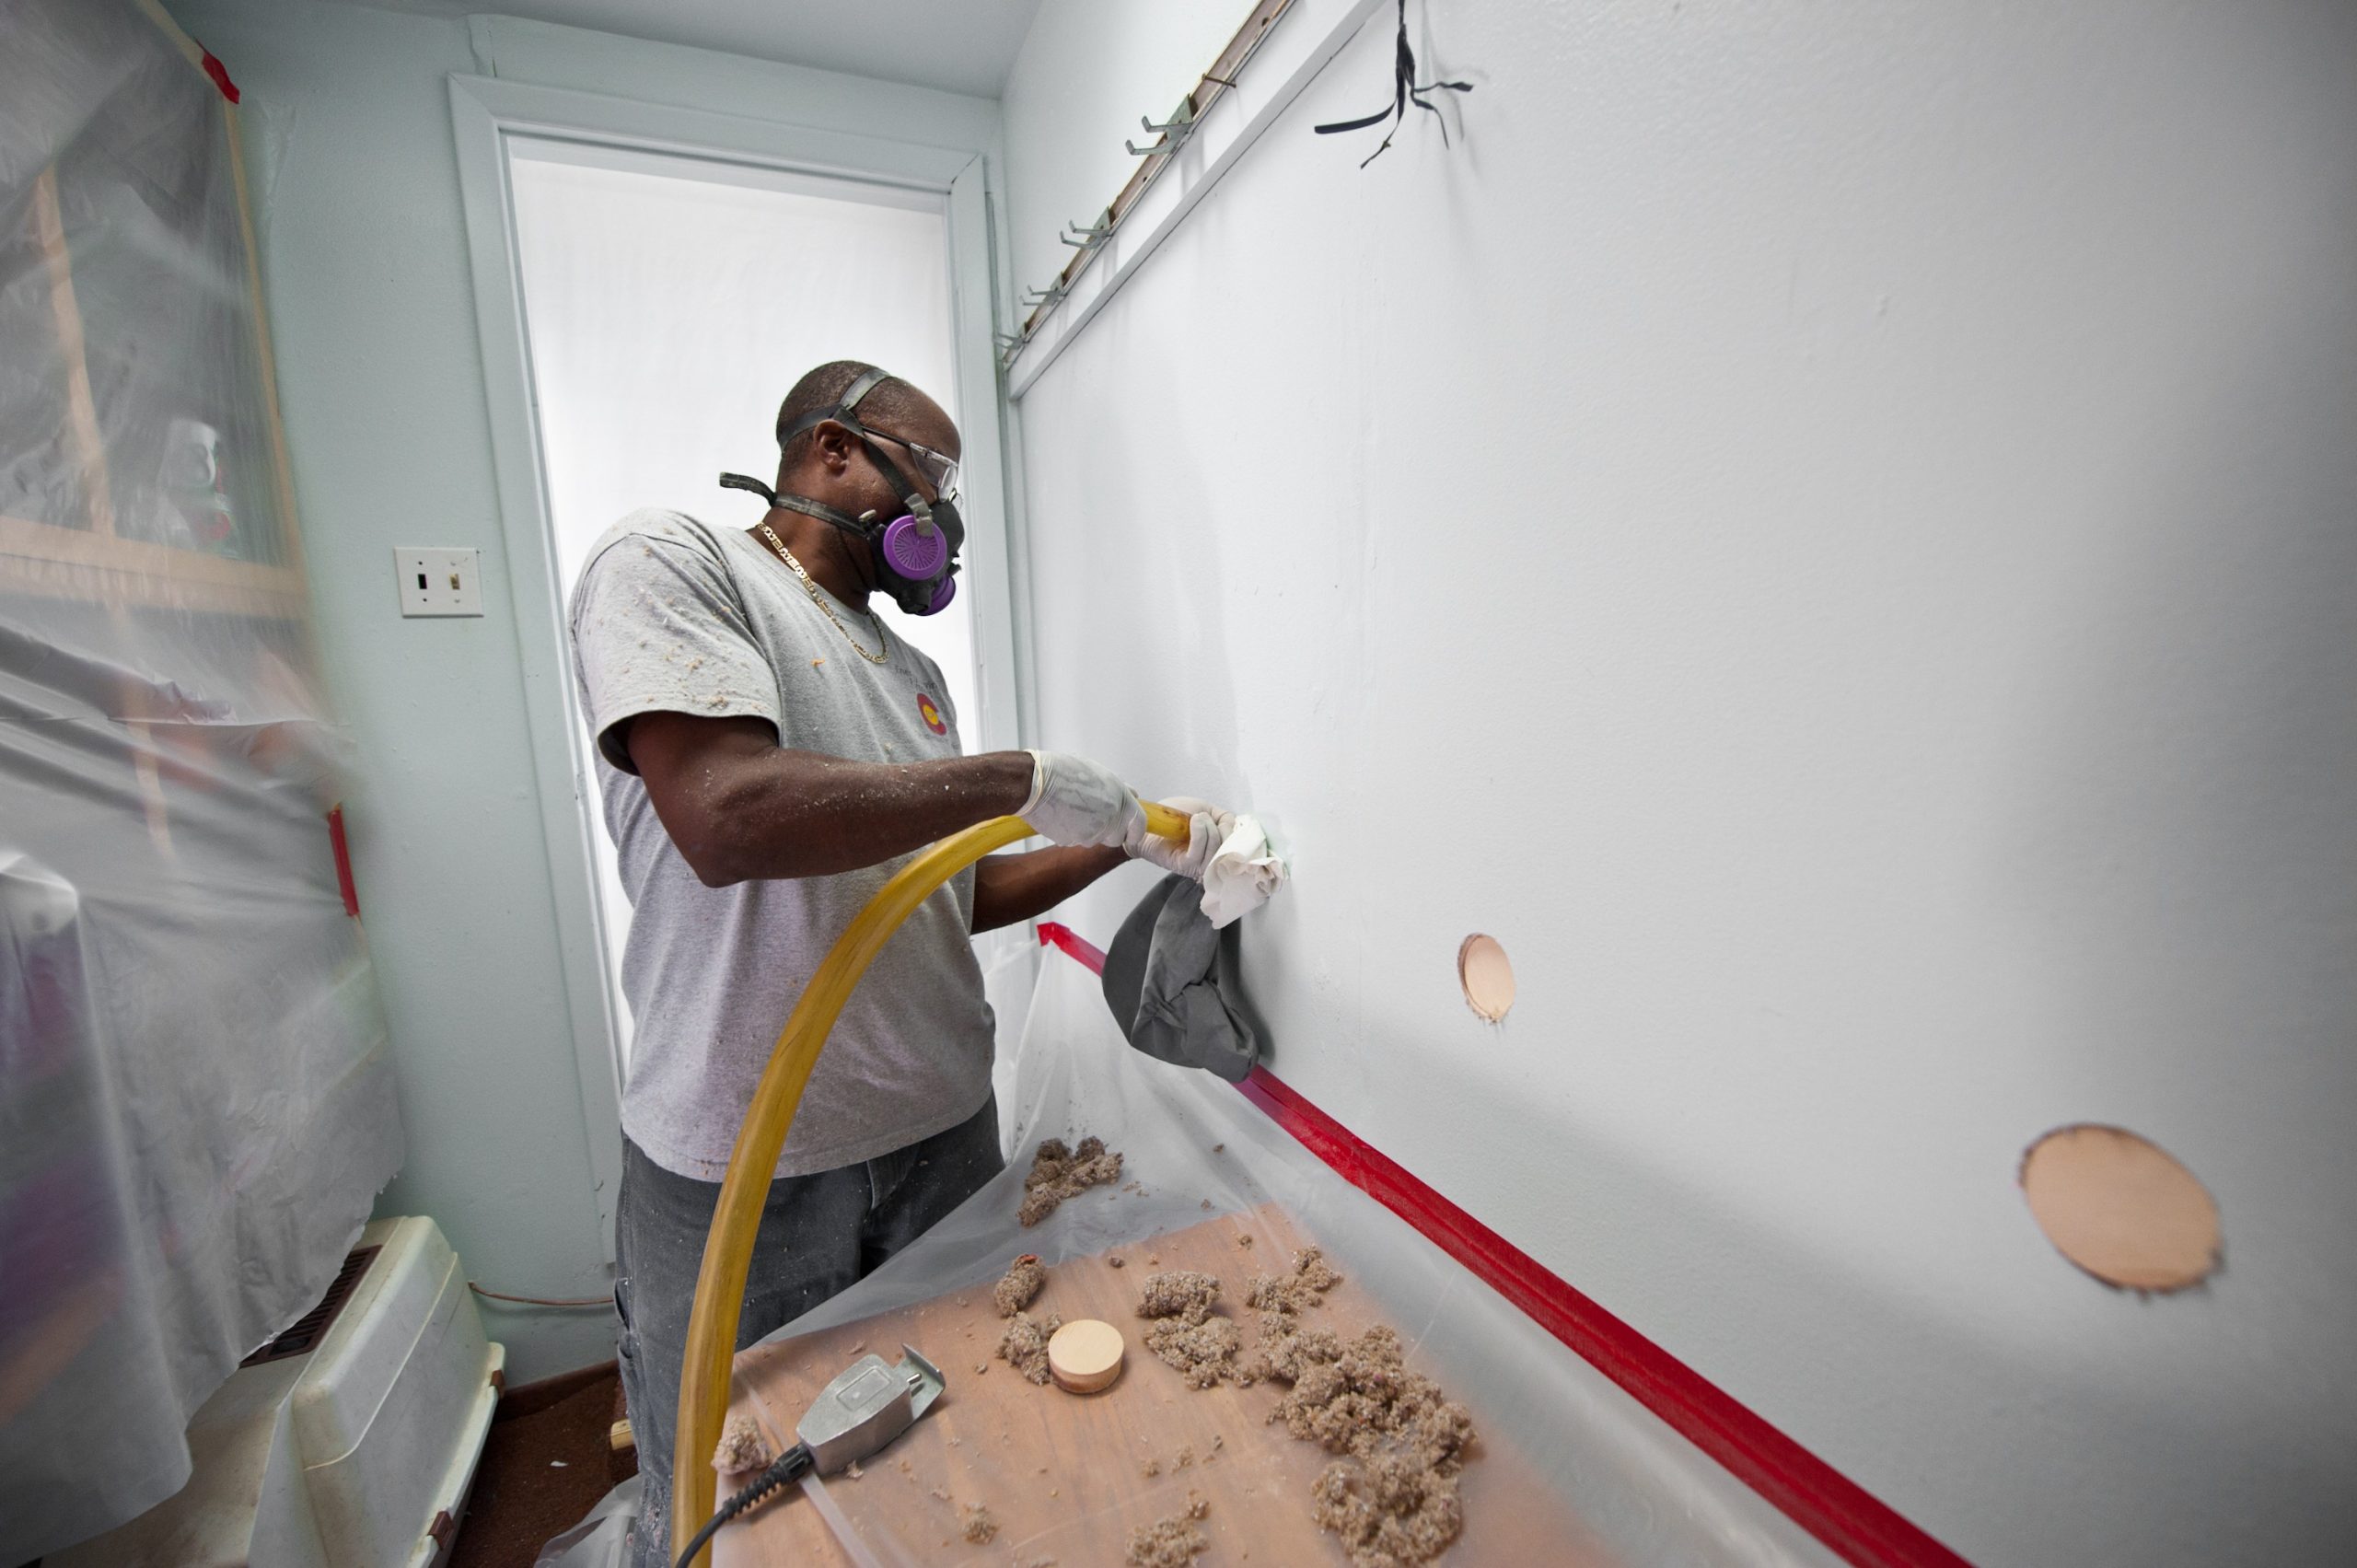 A worker blows cellulose insulation in the interior walls of a home.